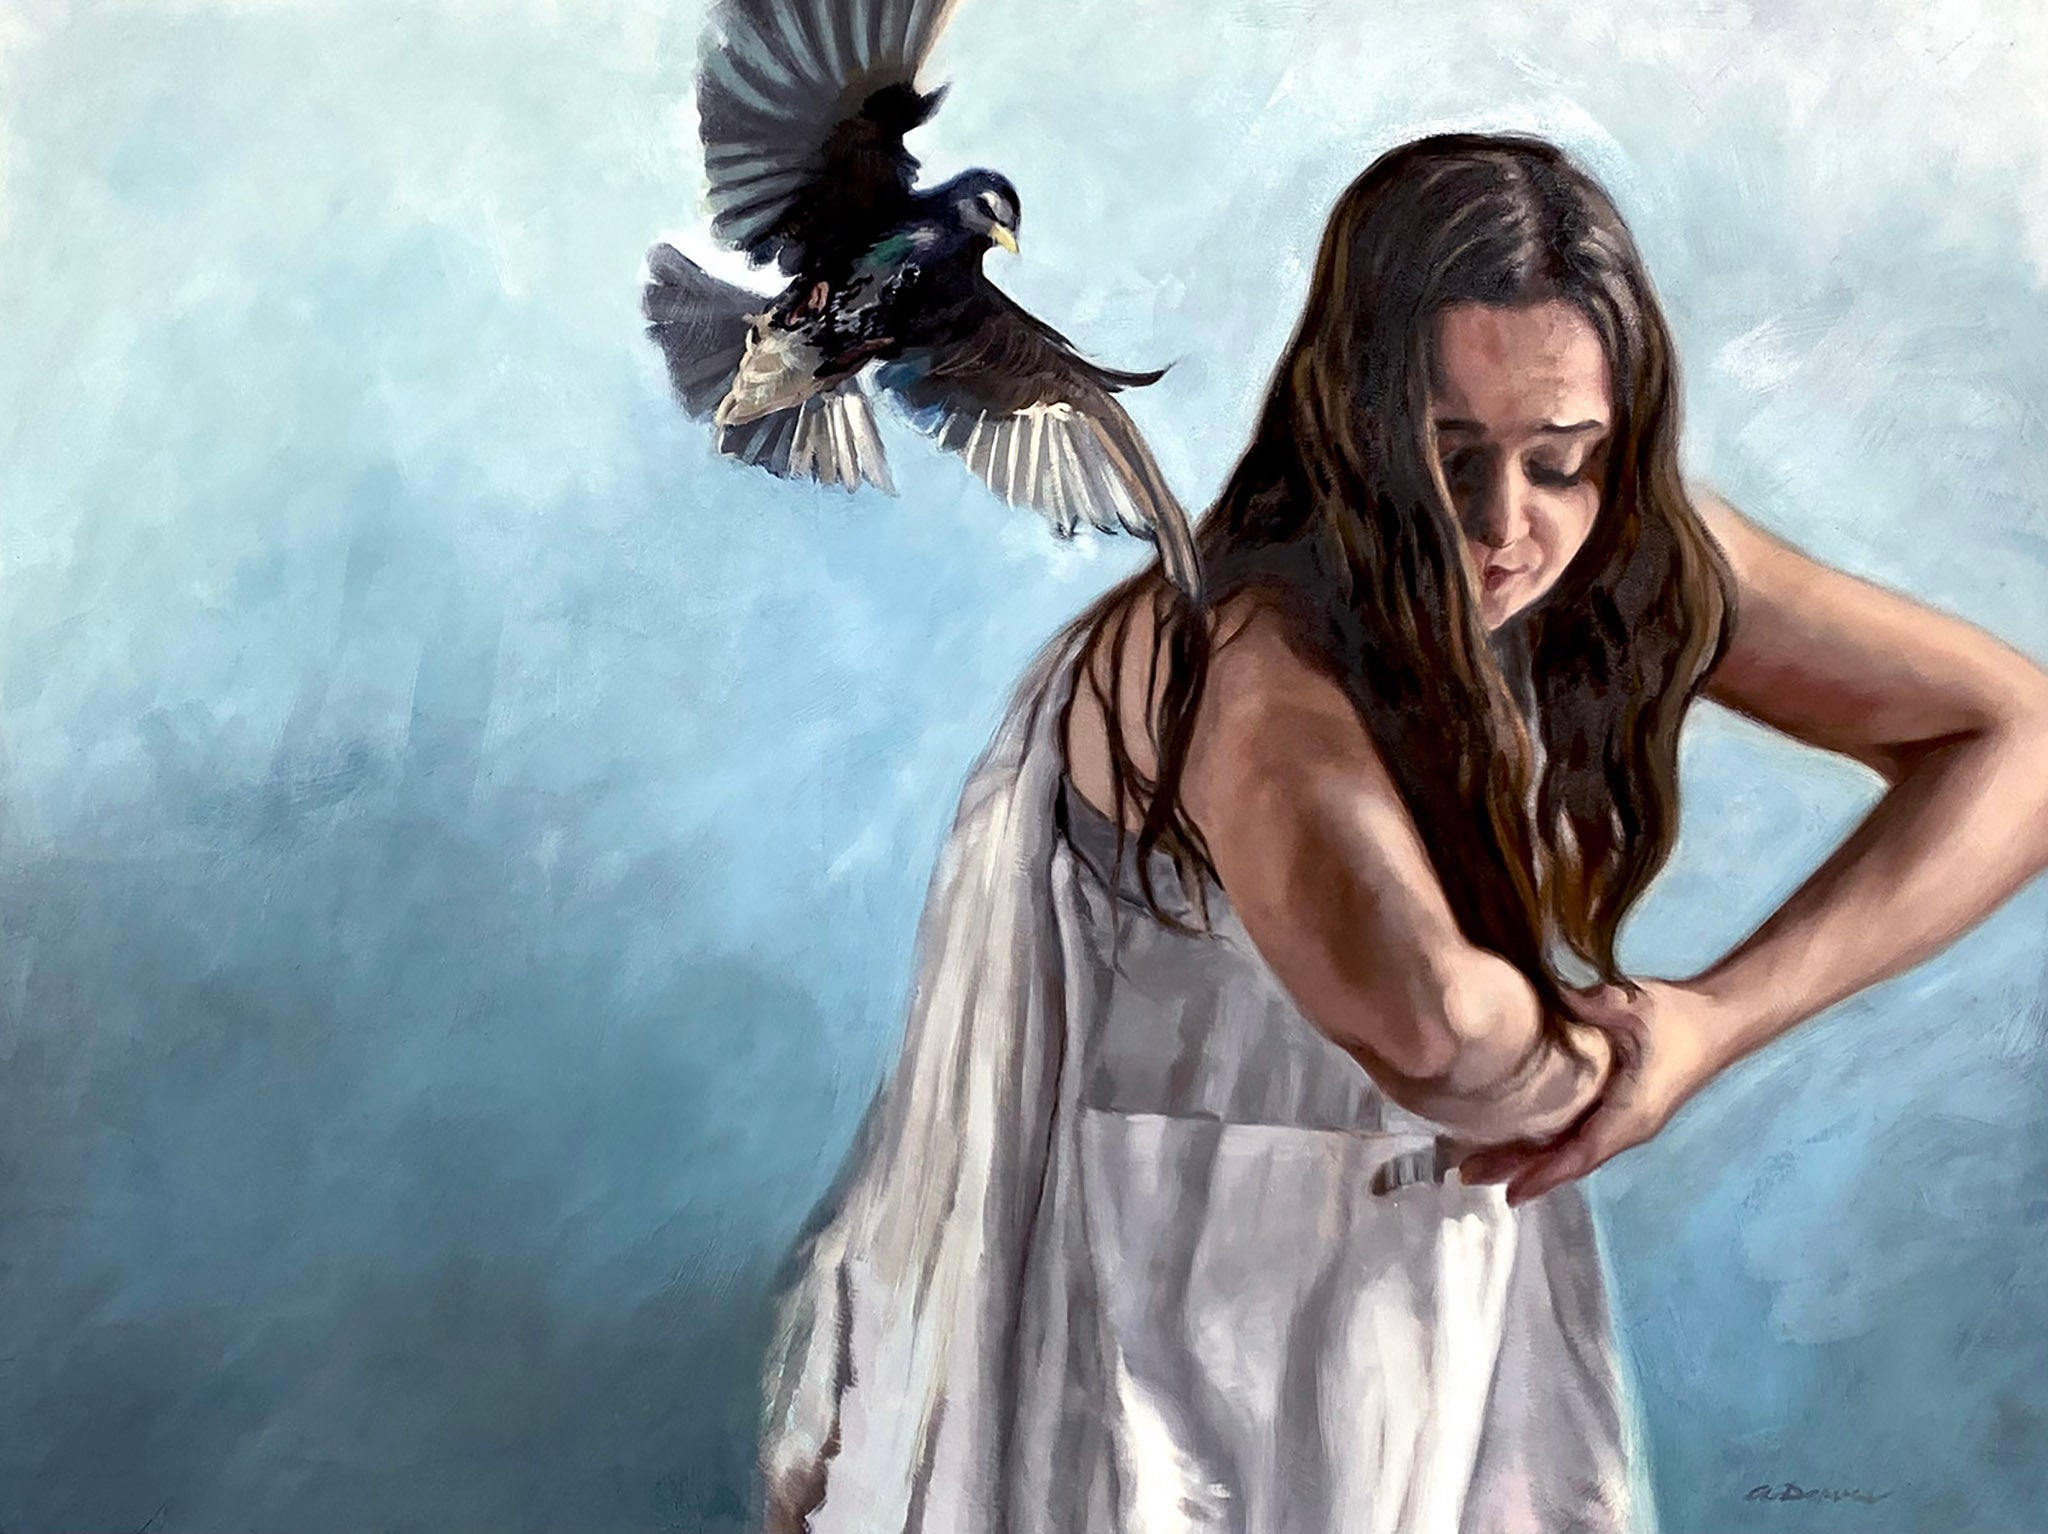 Oil painting of a woman in a white dress with long brown hair, arms folded like bird wings and a bird flying above. 24"x18" (25"x19" framed) oil on panel by April Dawes